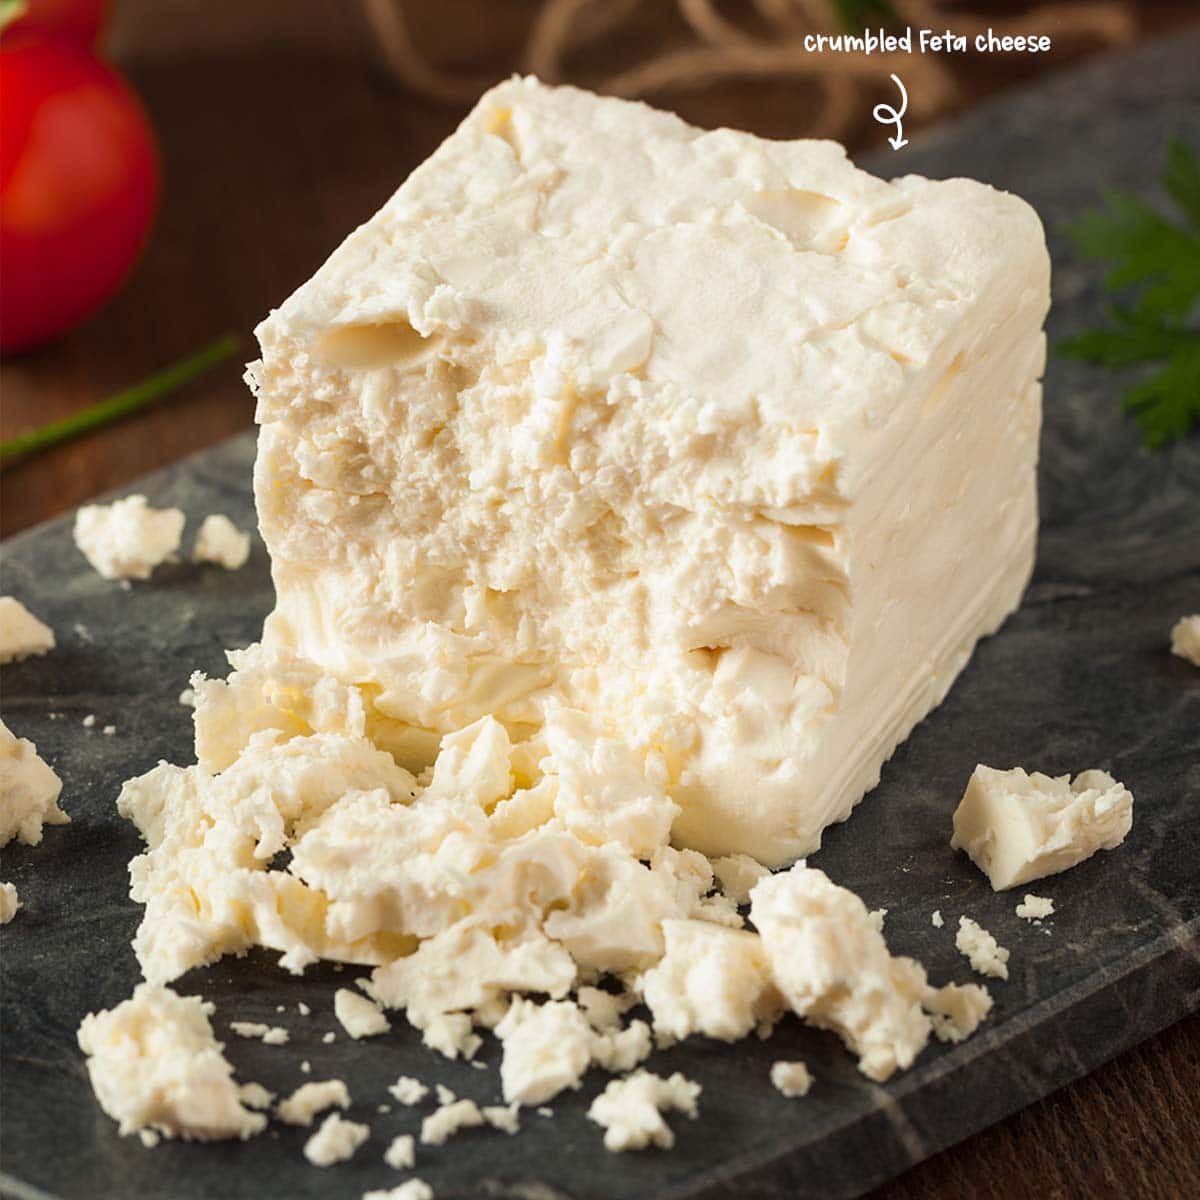 When you buy feta cheese in block form, it is packaged in brine, milk, olive oil, or water. These liquids are there to maintain the cheese's softness and its creaminess.